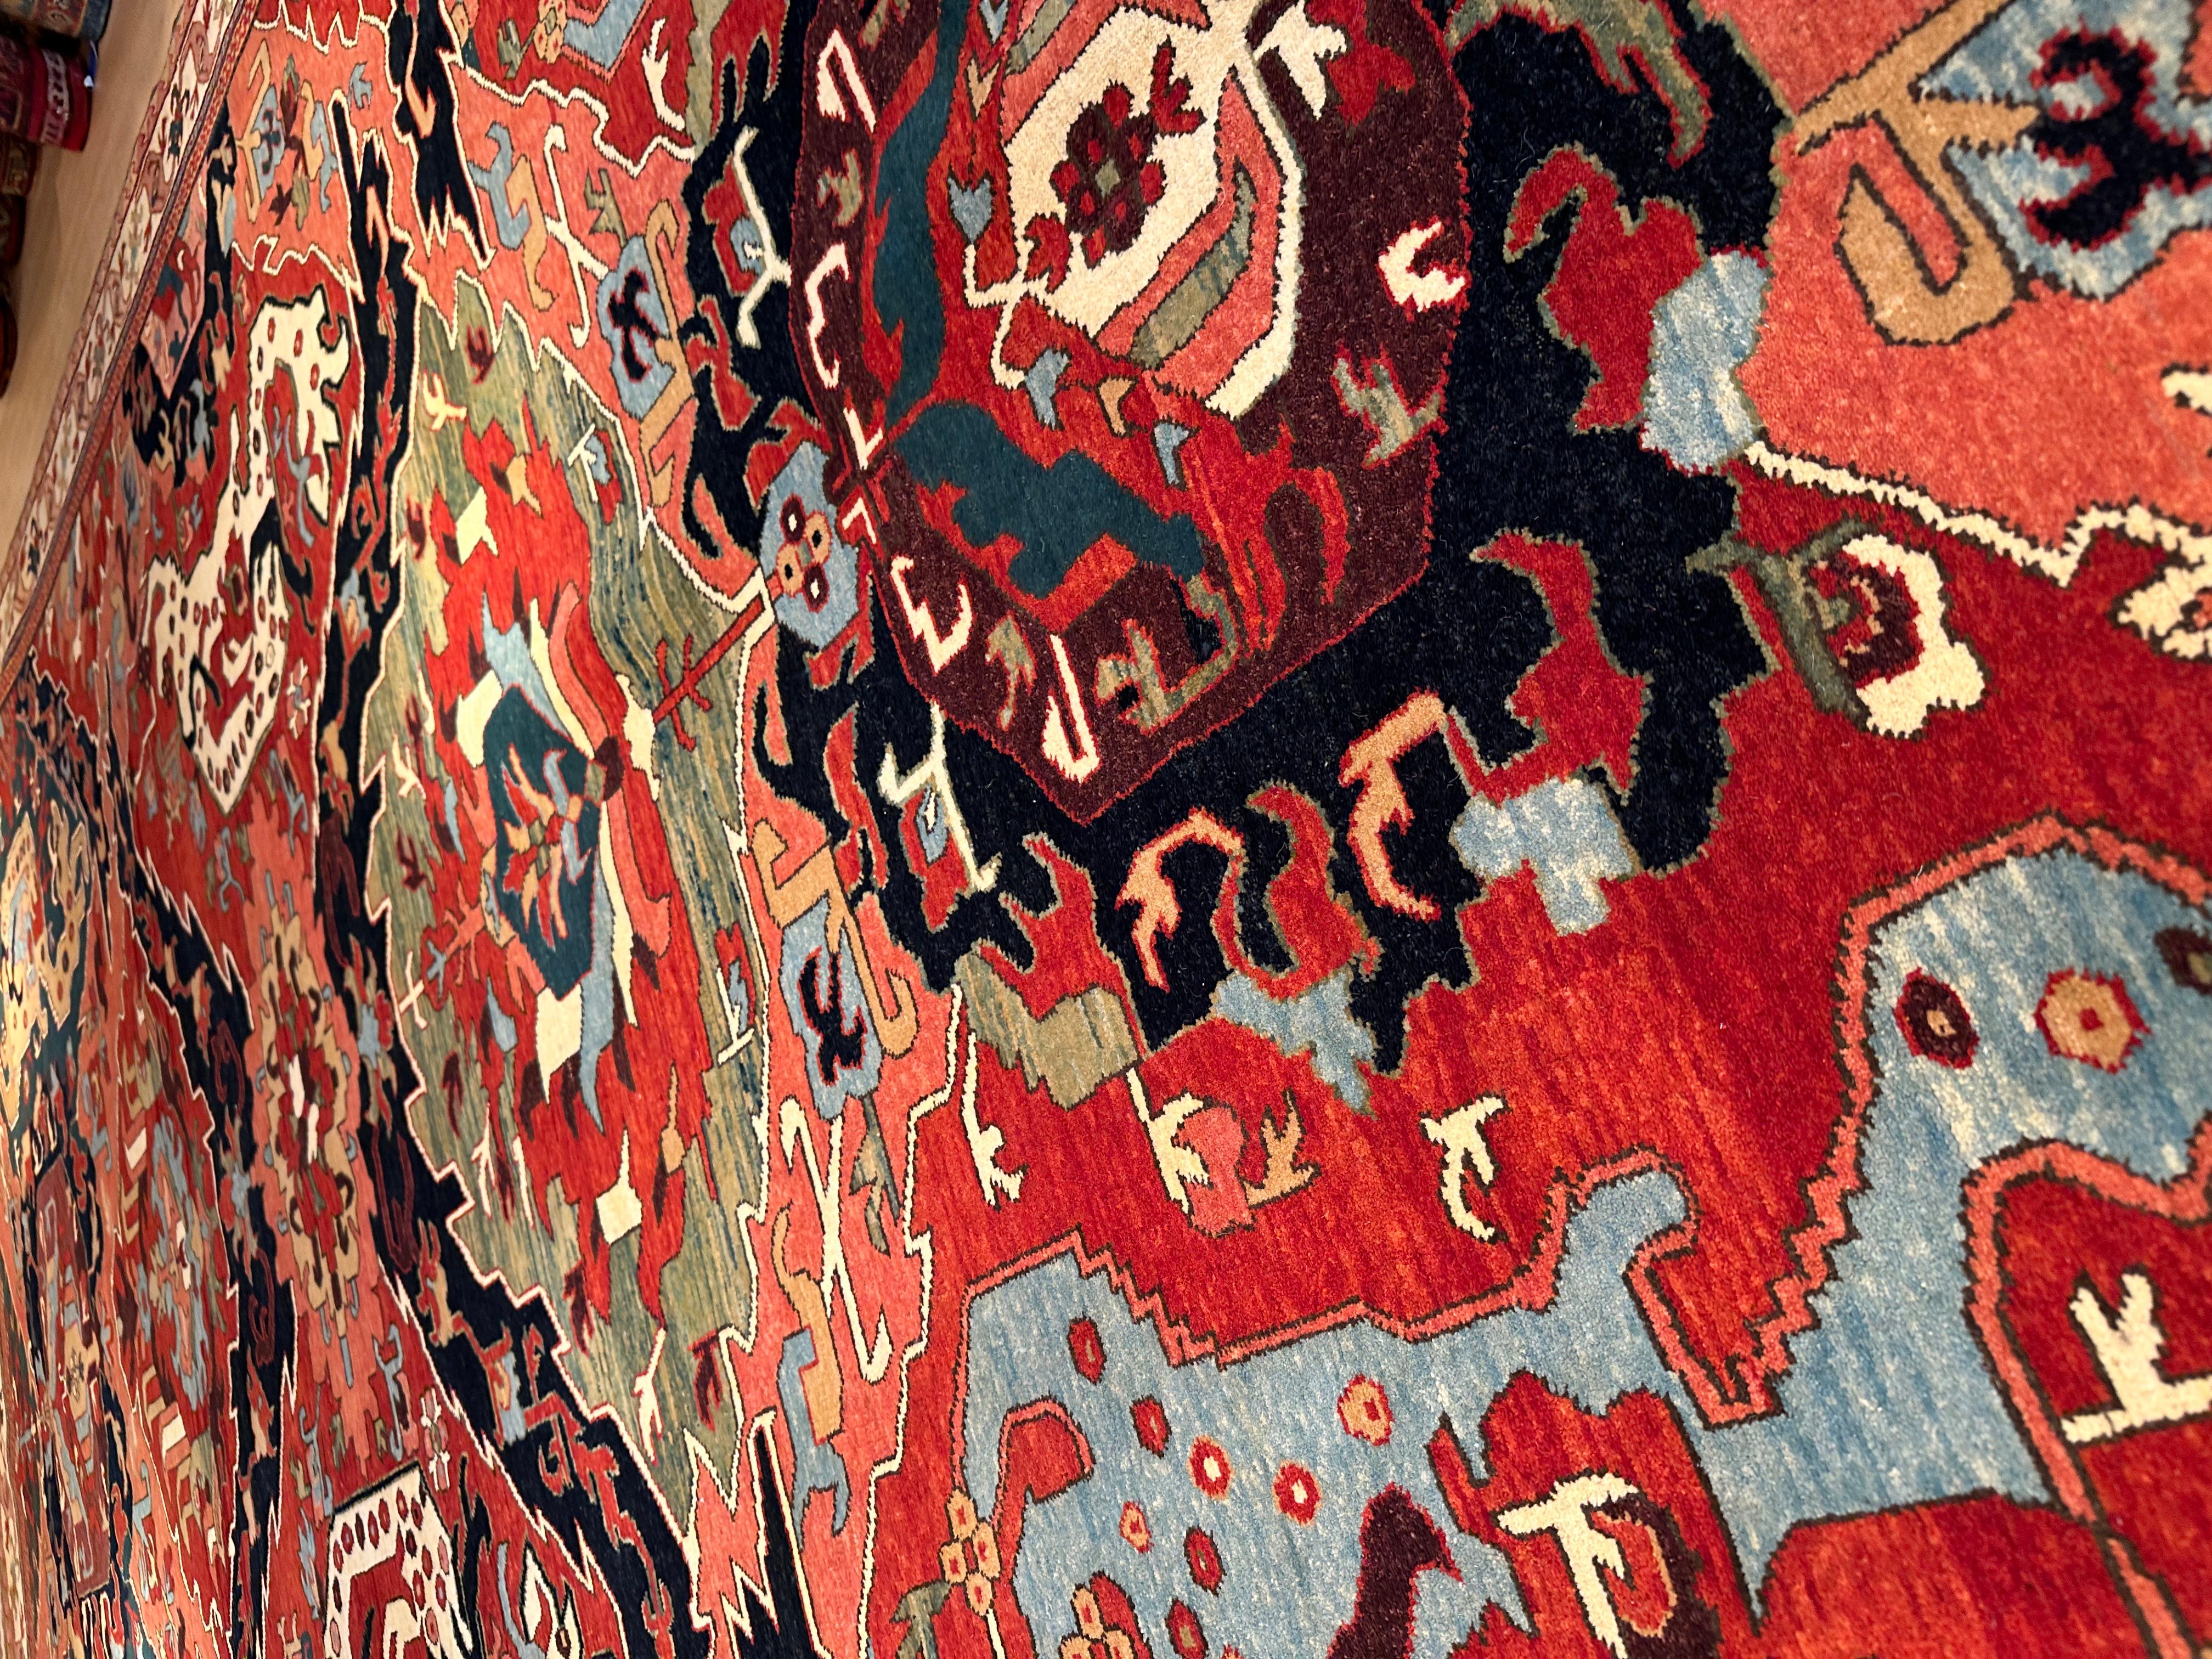 The source of the rug comes from the book Orient Star – A Carpet Collection, E. Heinrich Kirchheim, Hali Publications Ltd, 1993 nr.57. There has long been a fascination with the symbolism of the dragon and its depiction in carpet weavings. The